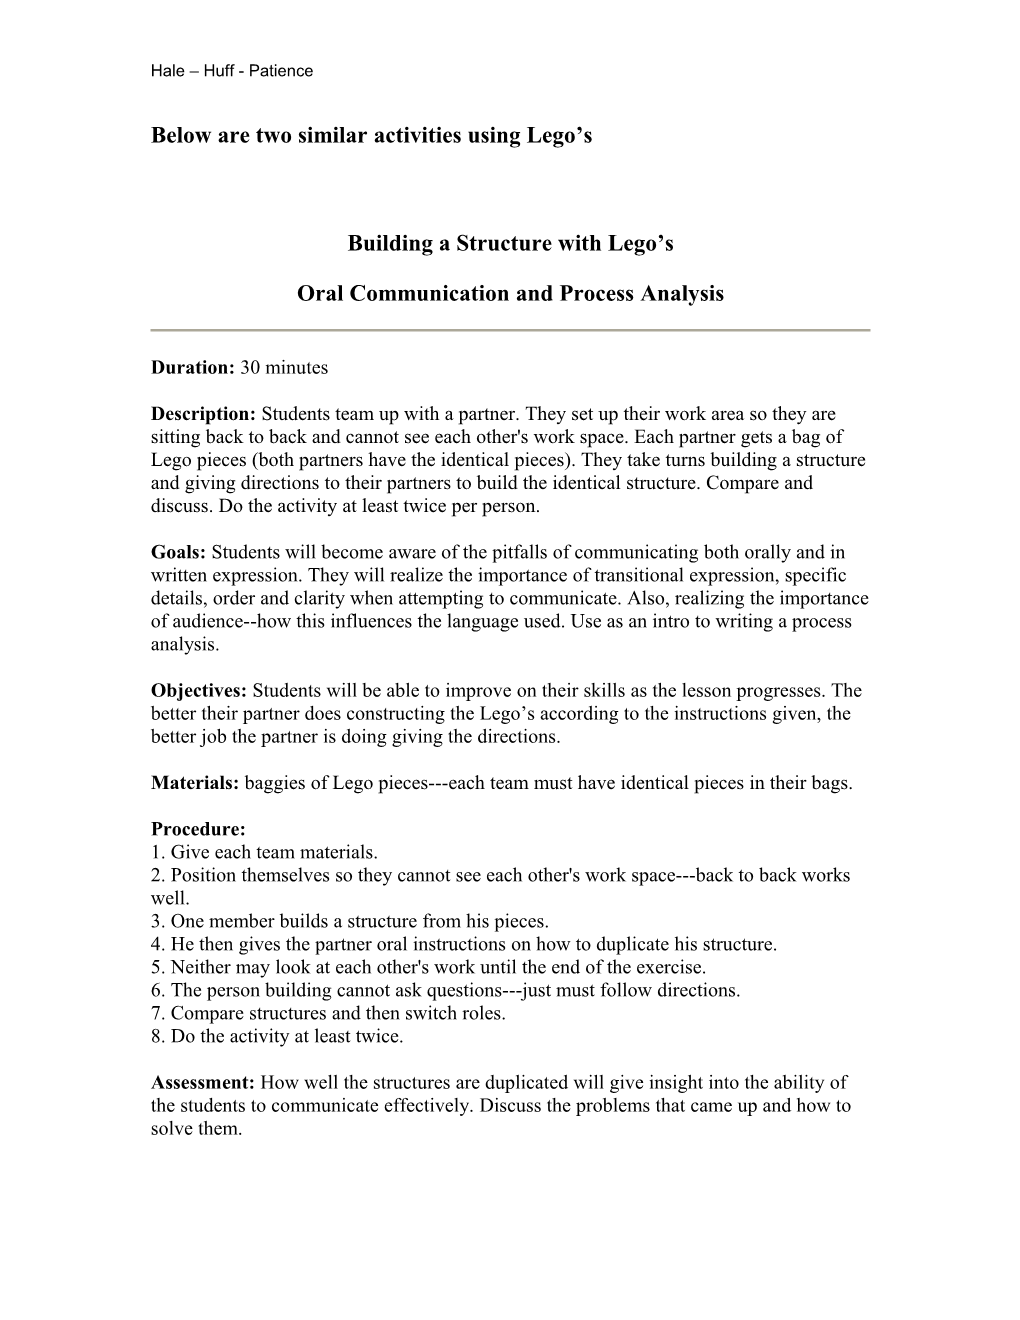 Building a Structure with Legos: Oral Communication and Process Analysis